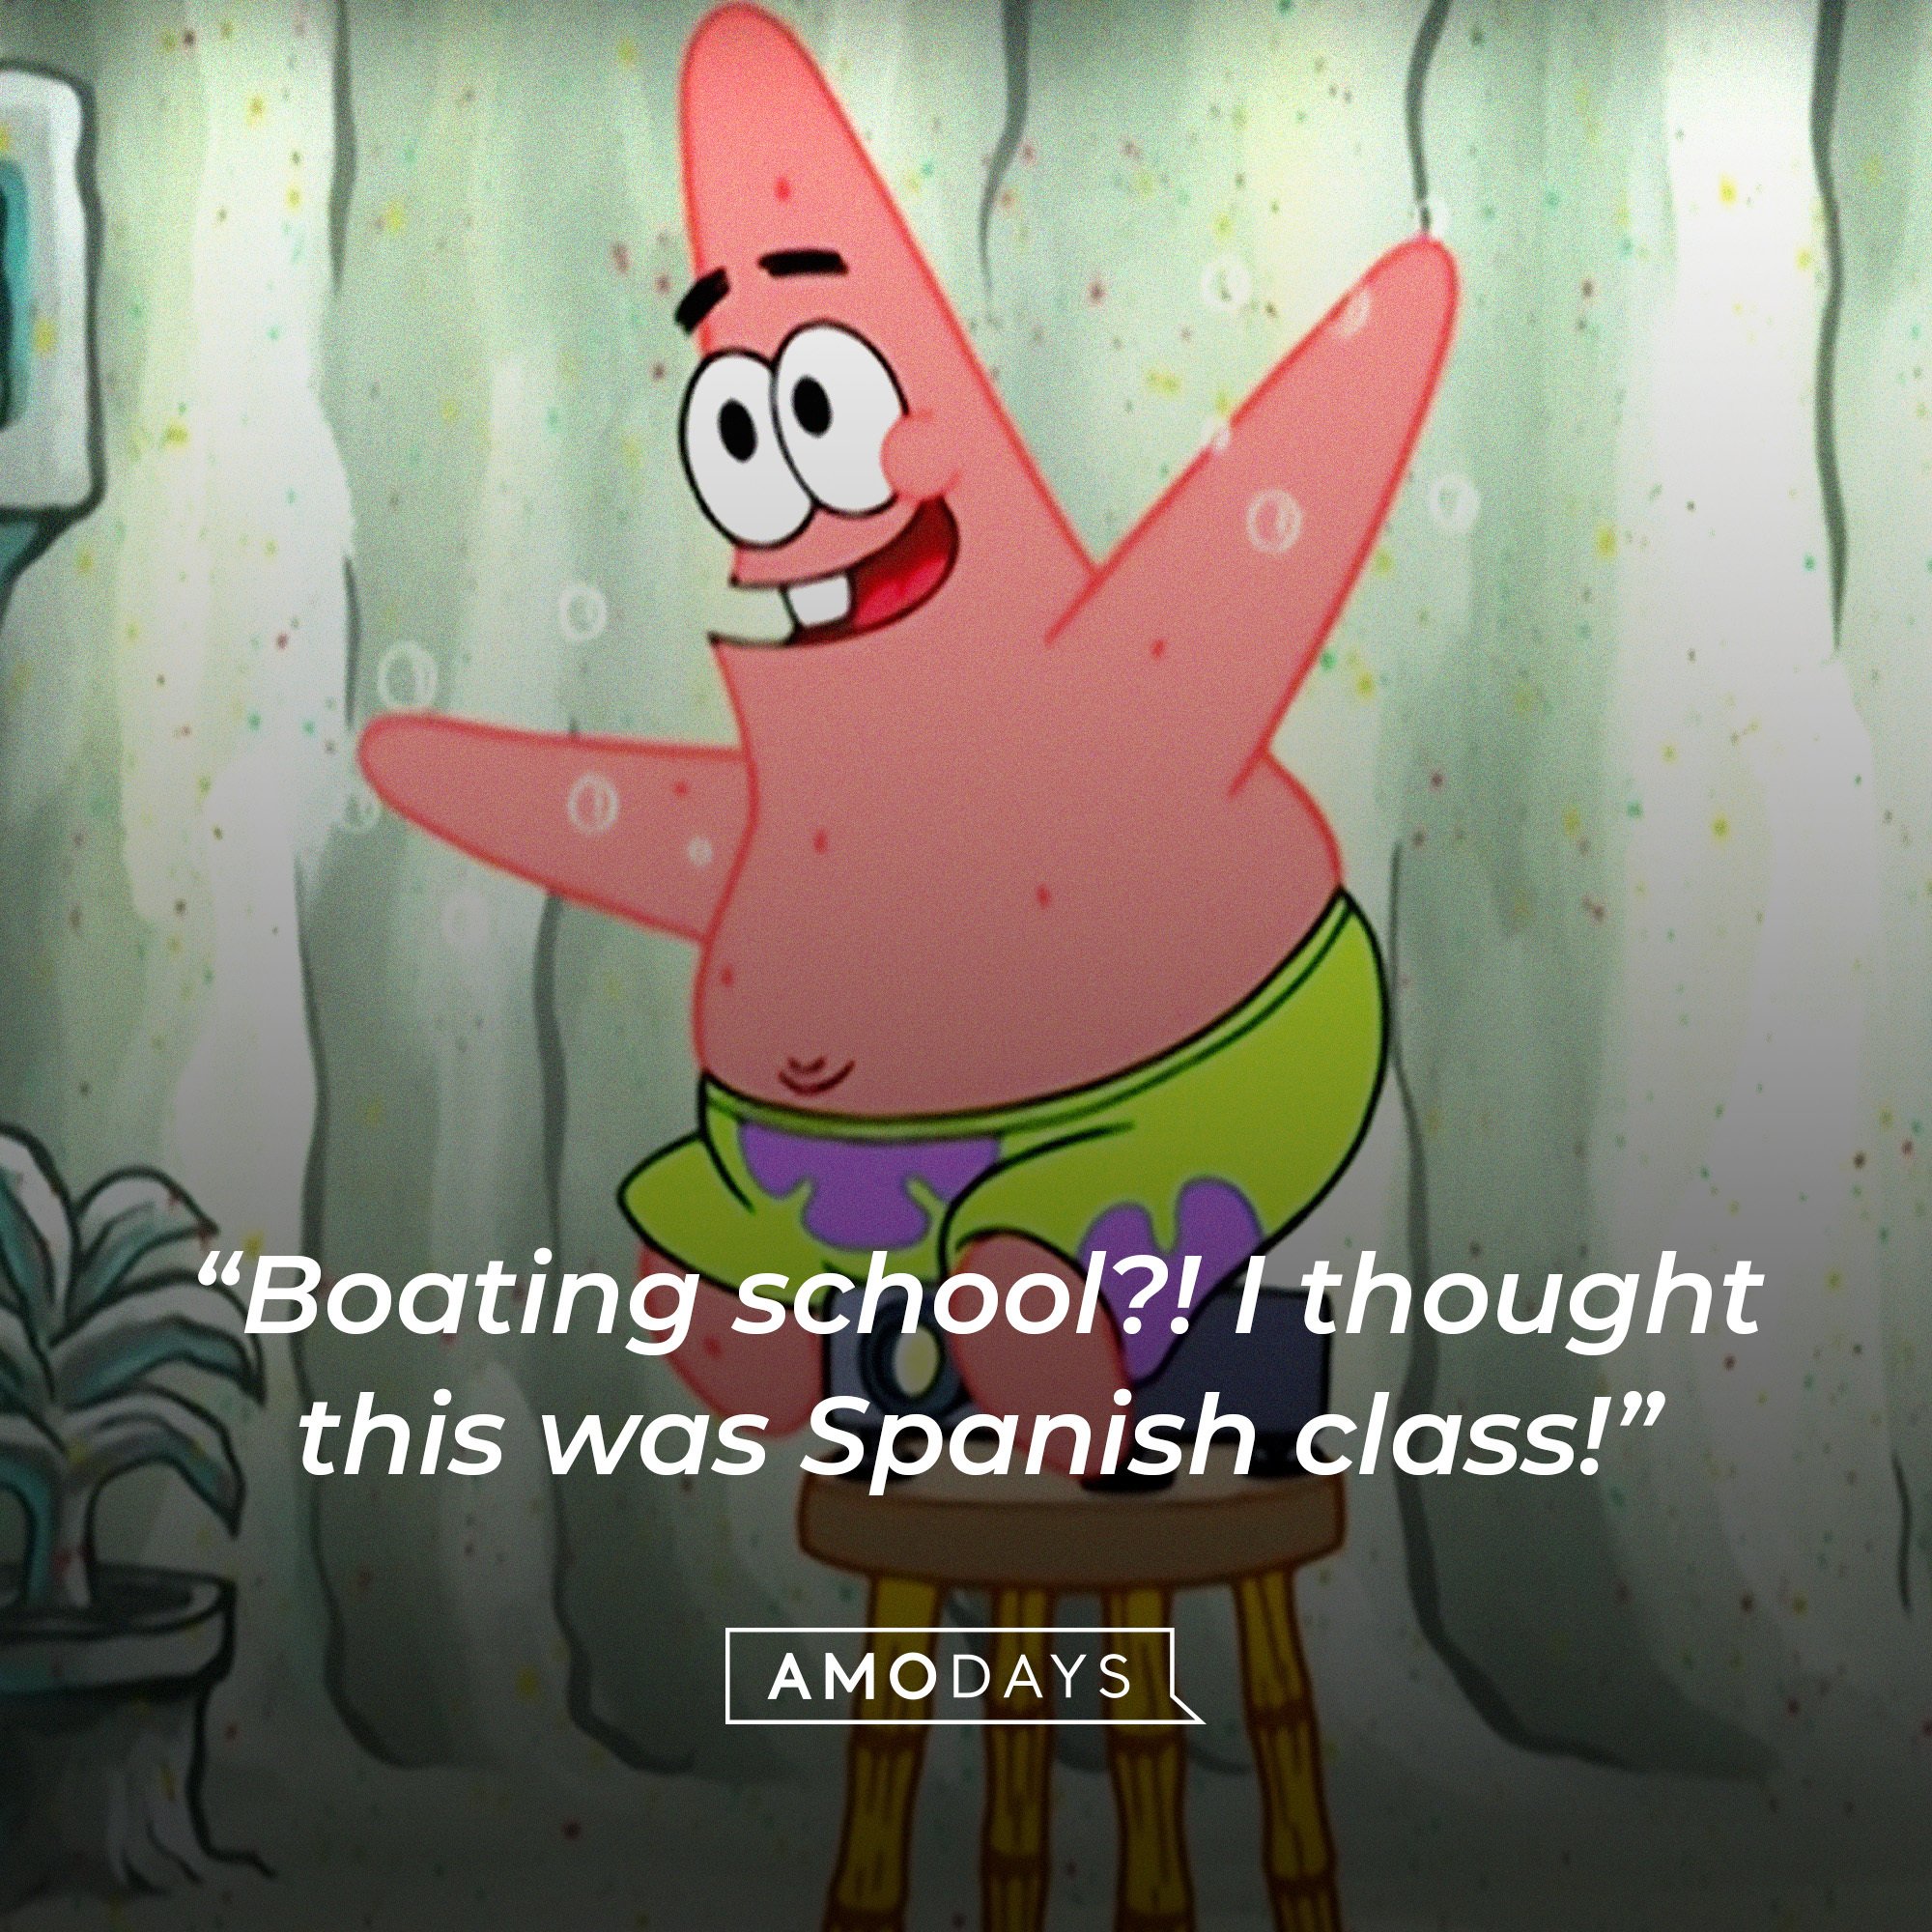 Patrick Star’s quote: “Boating school?! I thought this was Spanish class!” | Image: AmoDays